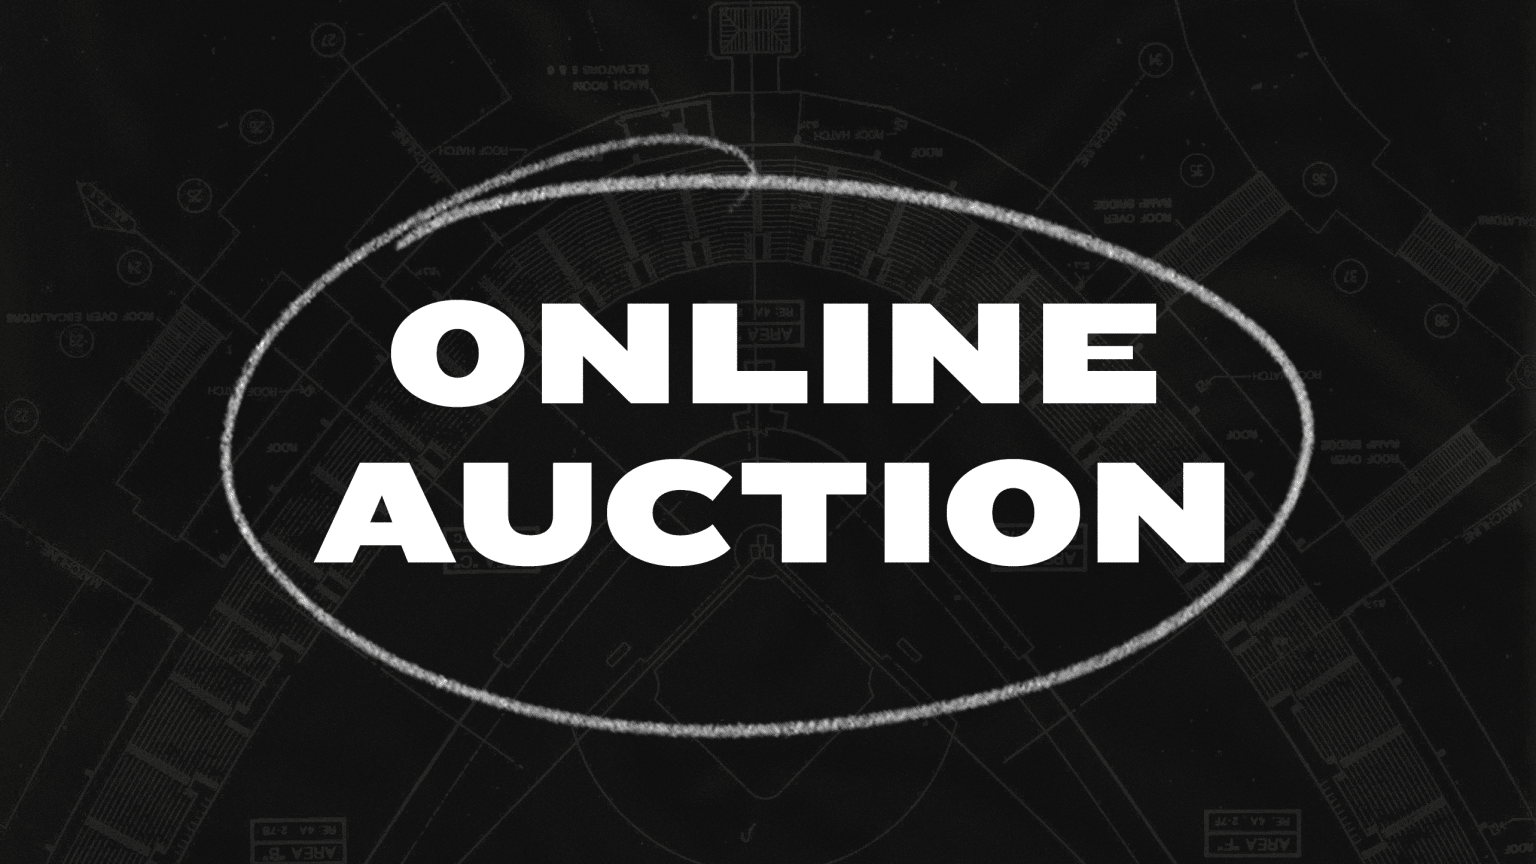 The official auction site of MLB Charities